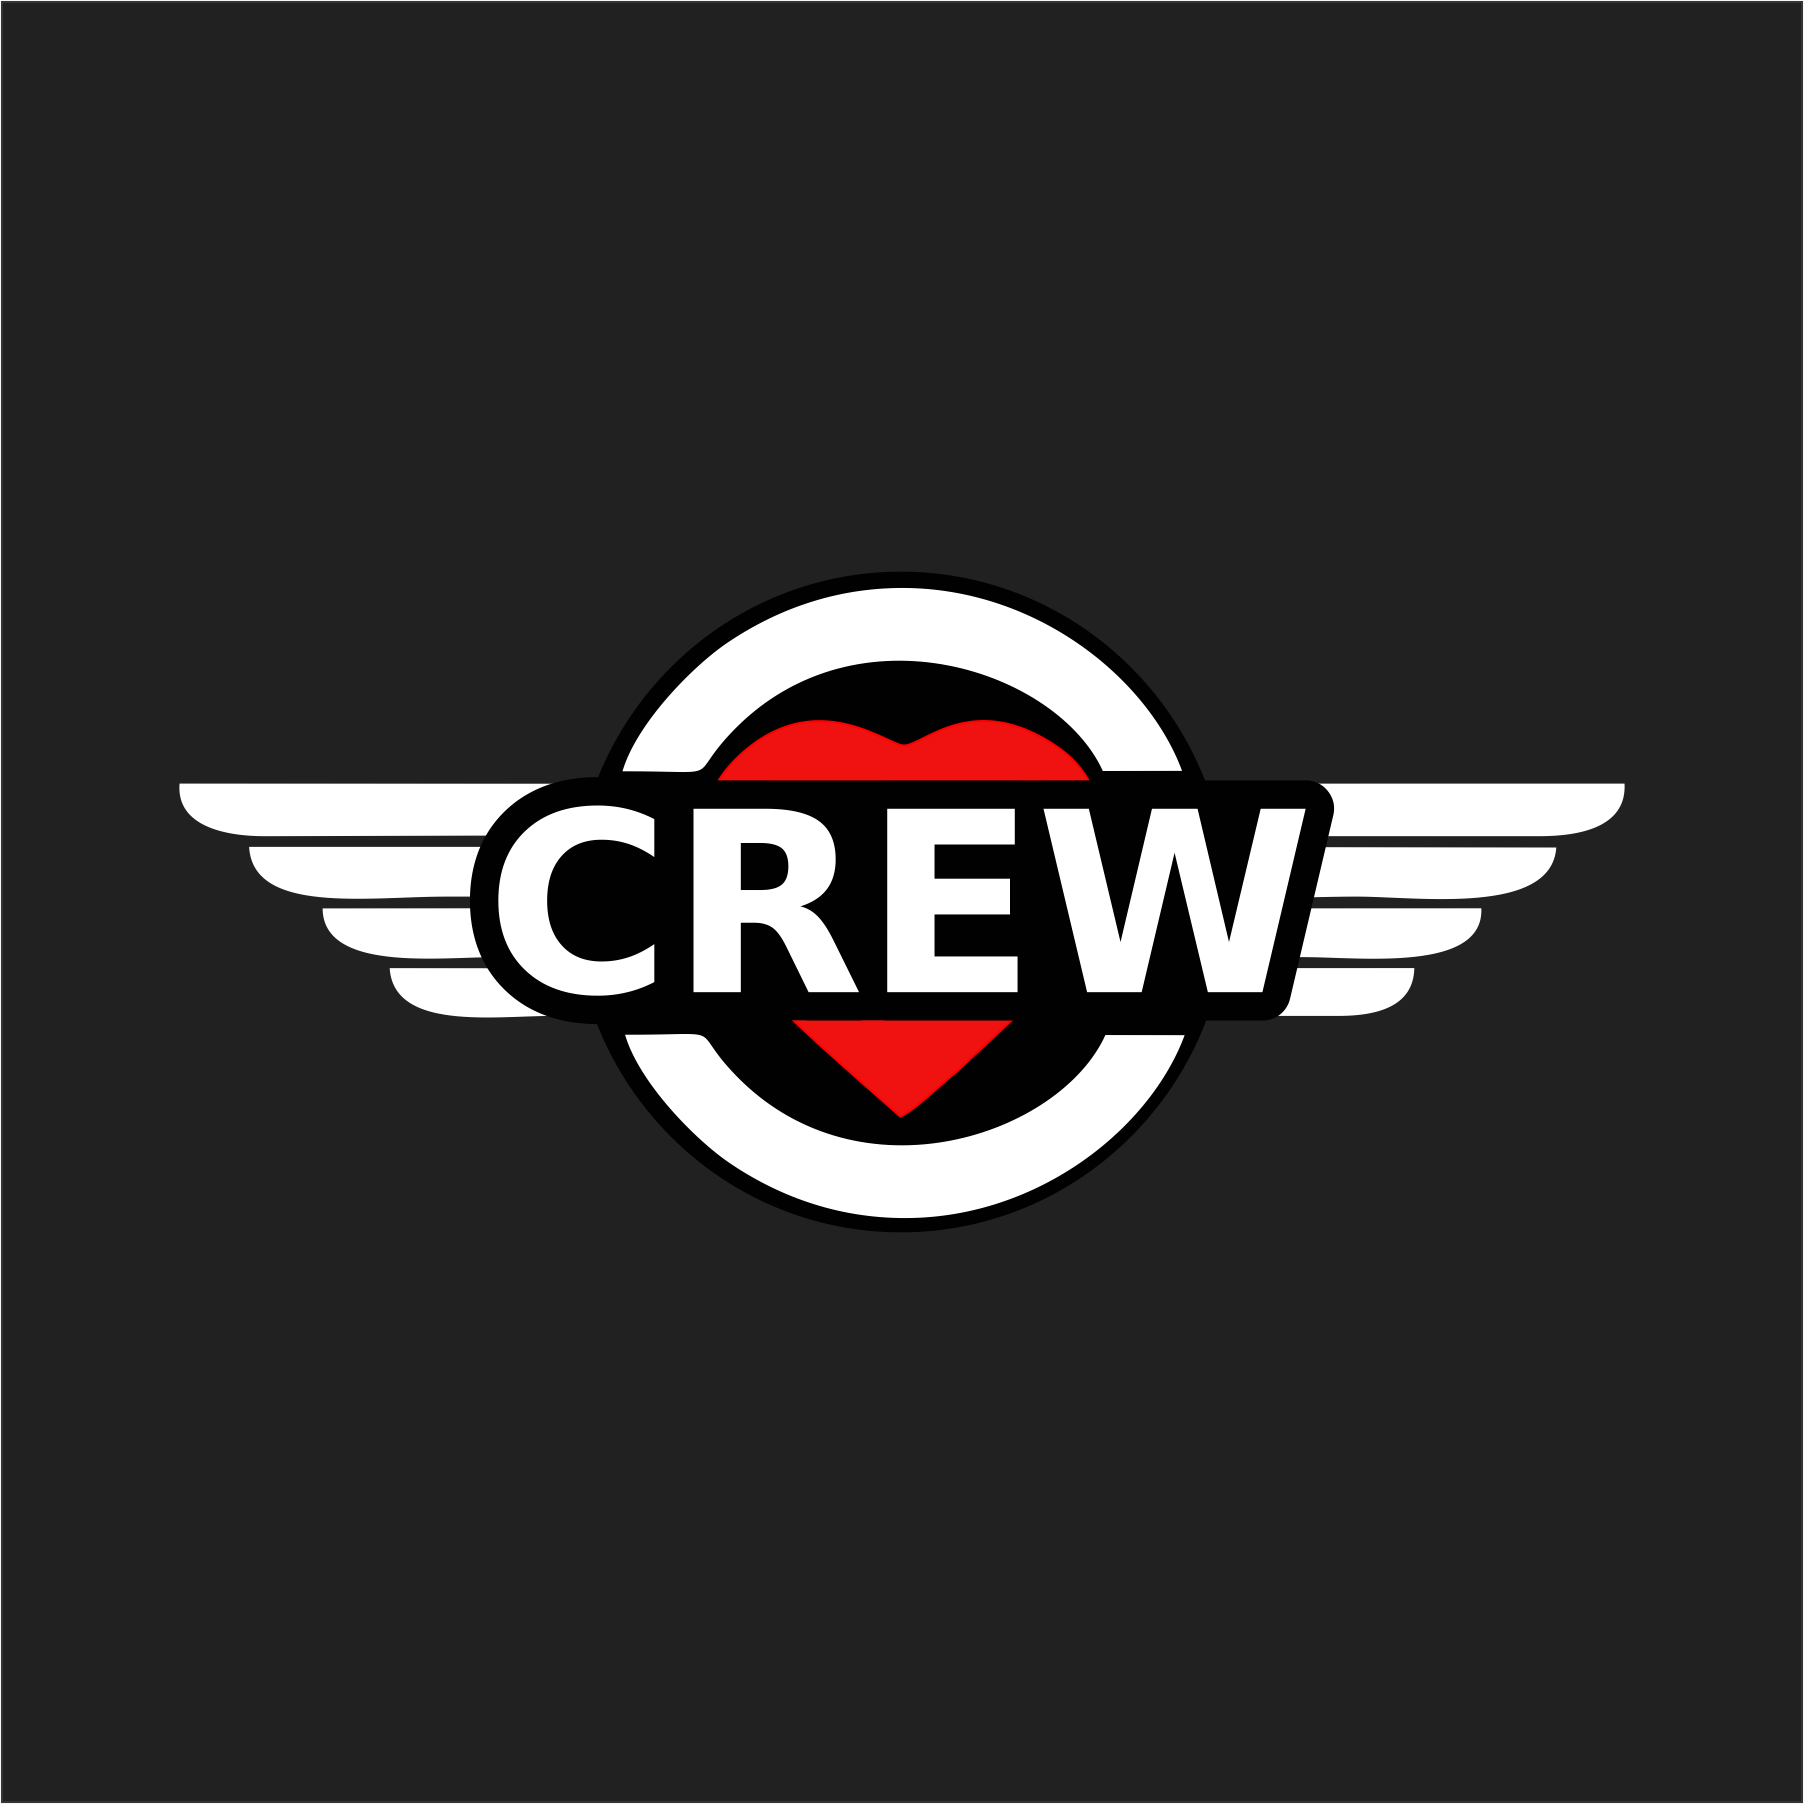 Crew -  Swinging Cup and Bottle Holder